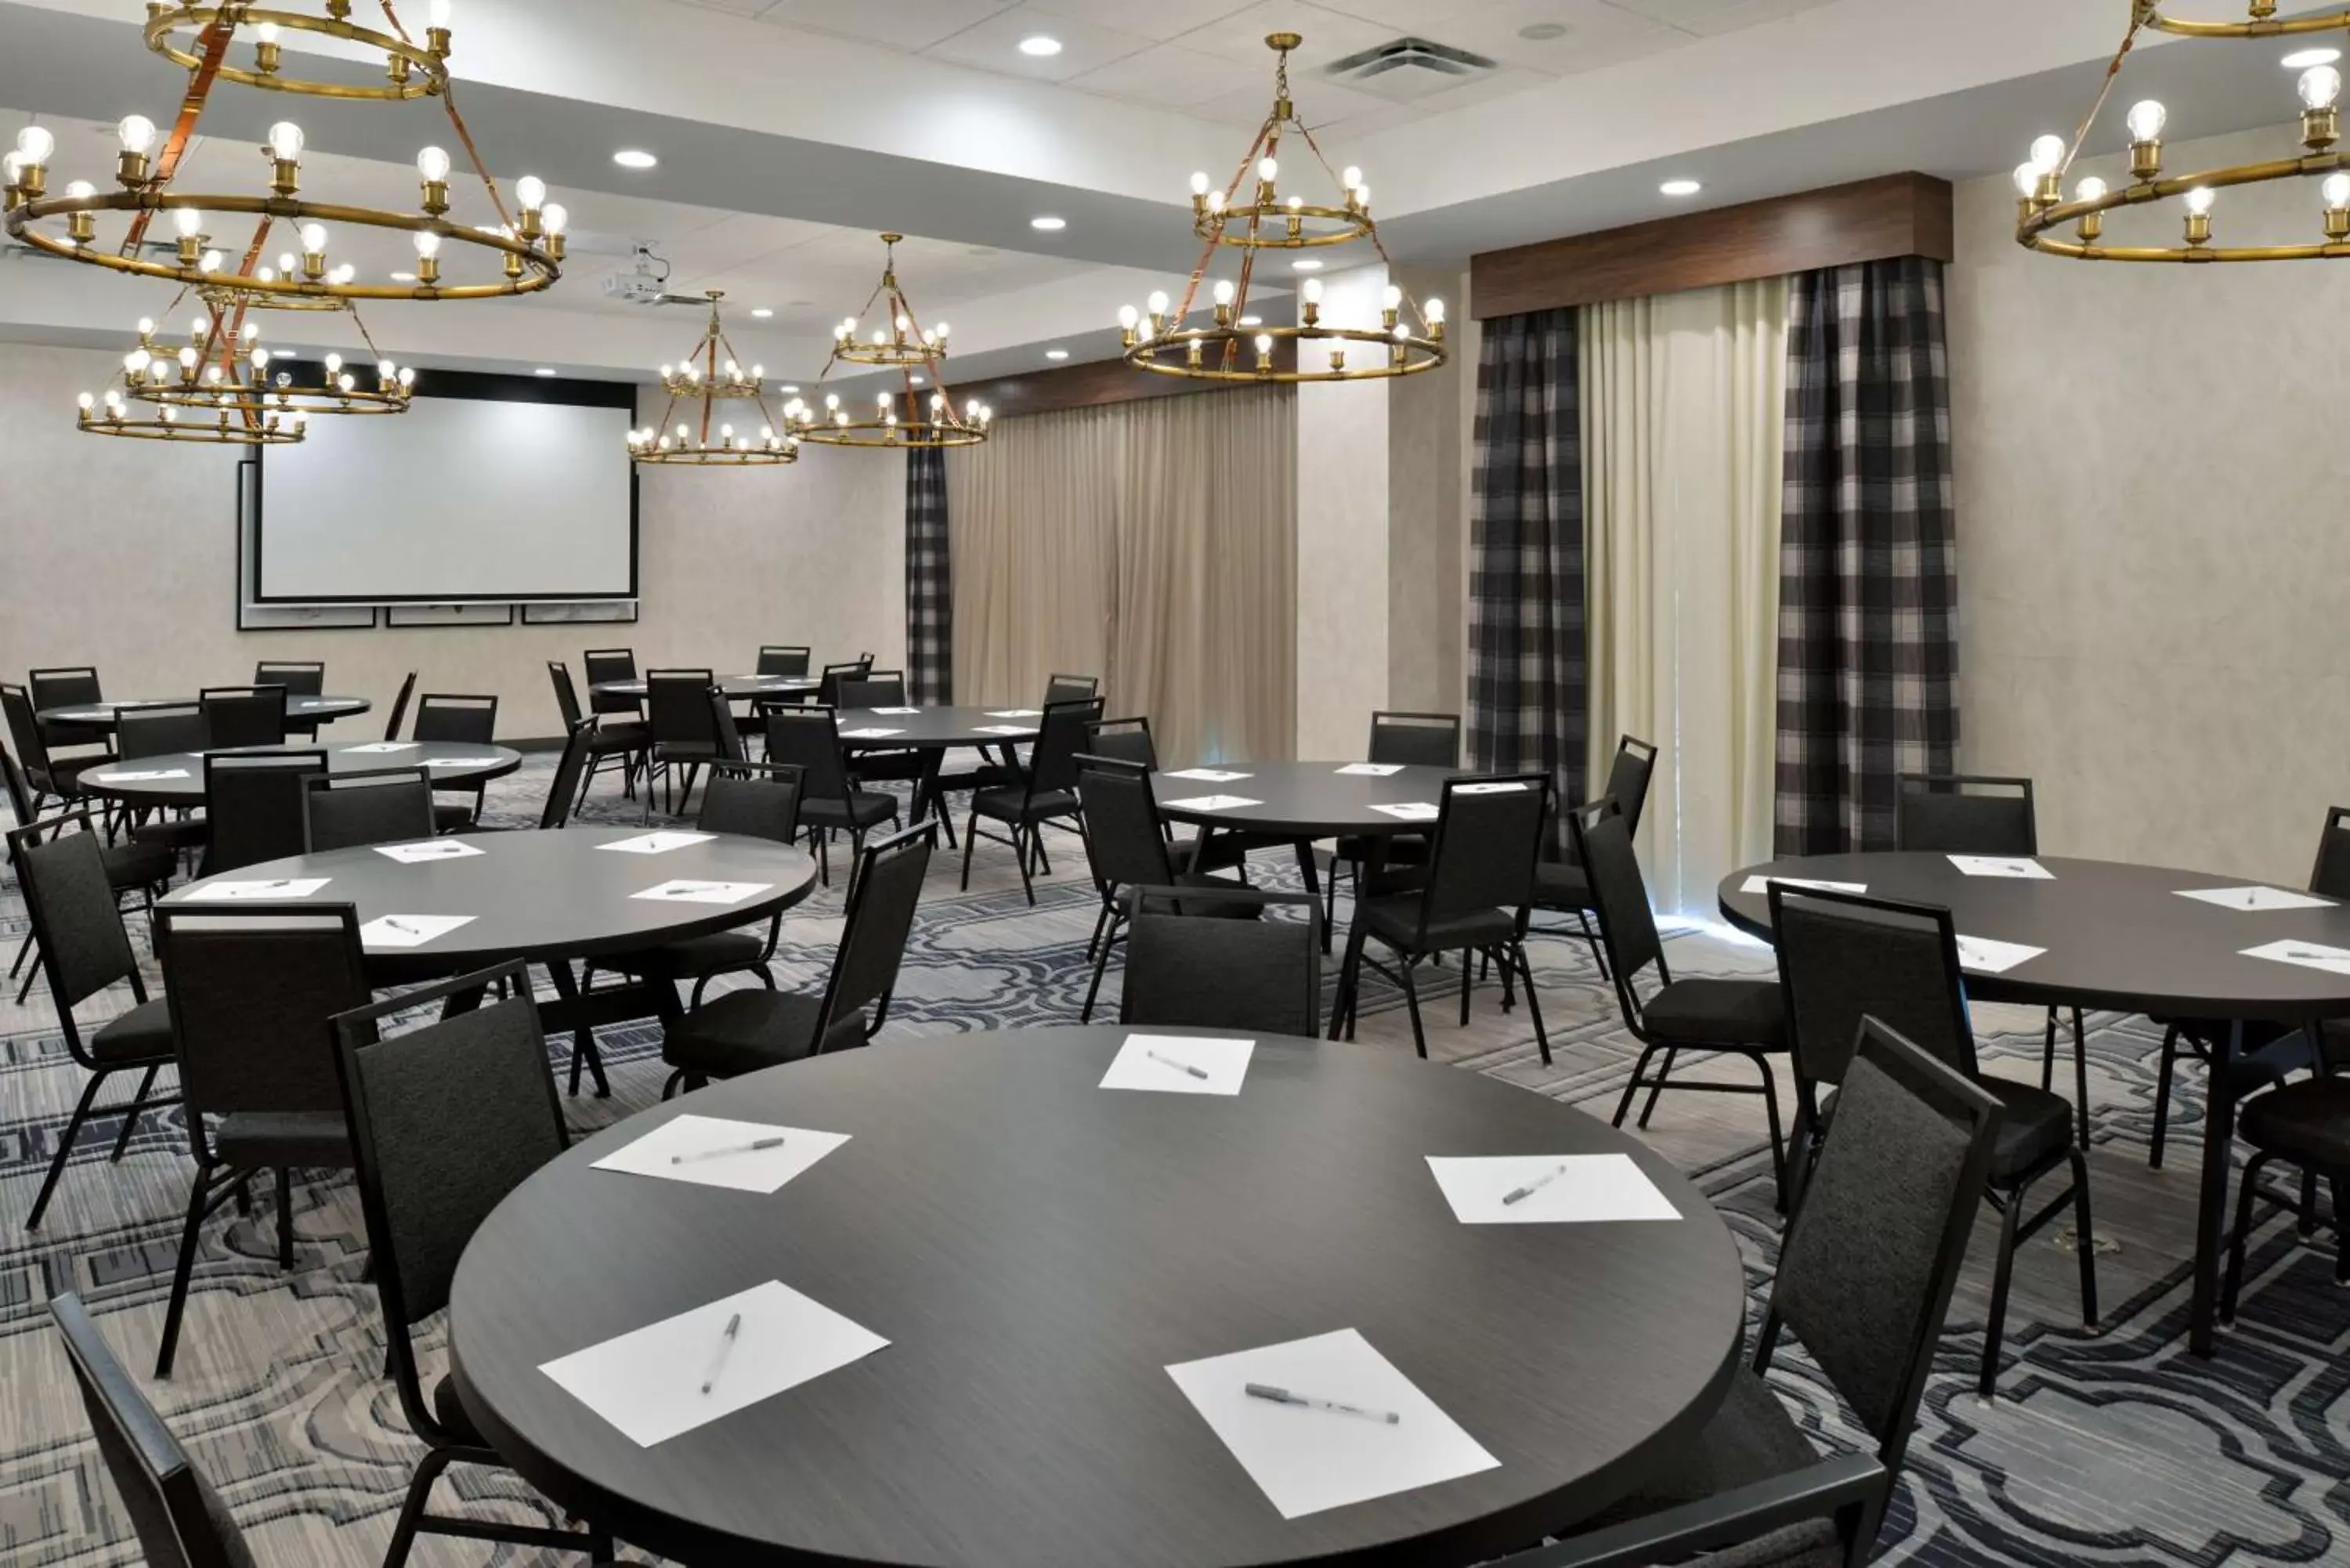 Meeting/conference room in Hampton Inn & Suites Greensboro Downtown, Nc